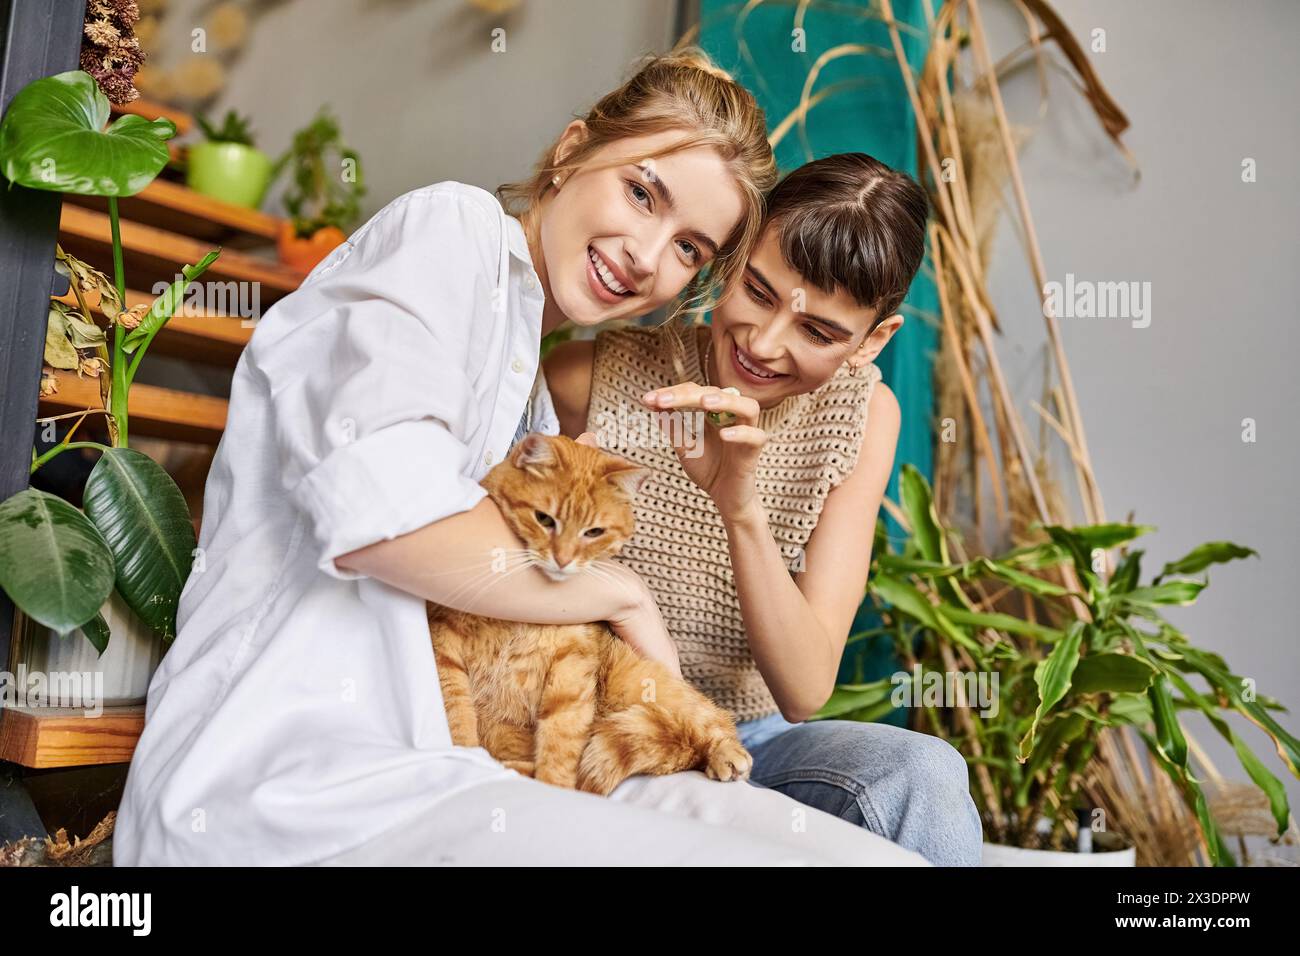 Two women sit on a bench, accompanied by a cat. Stock Photo